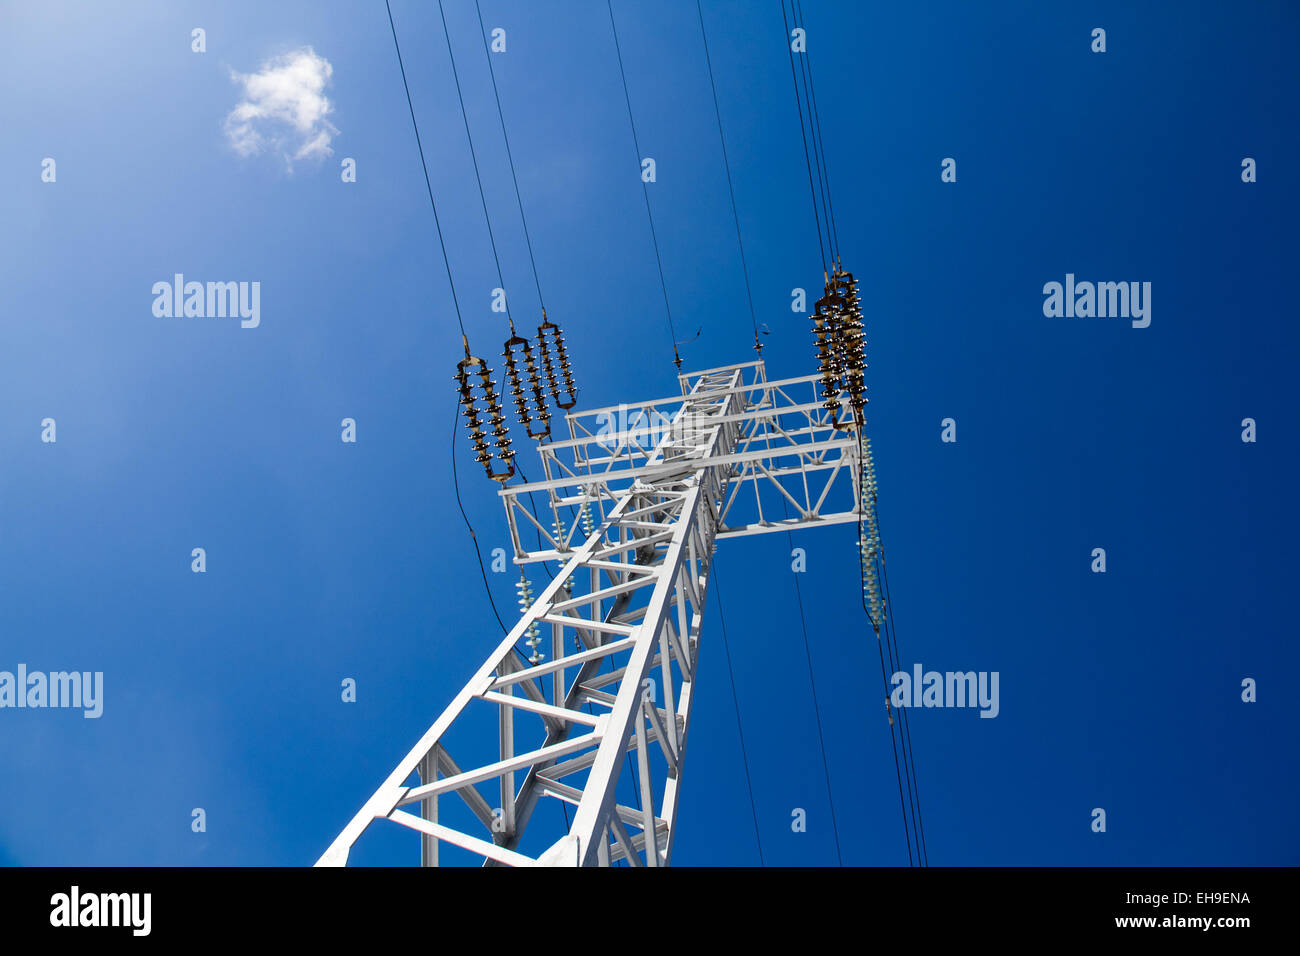 Reliance power lines against the blue sky Stock Photo